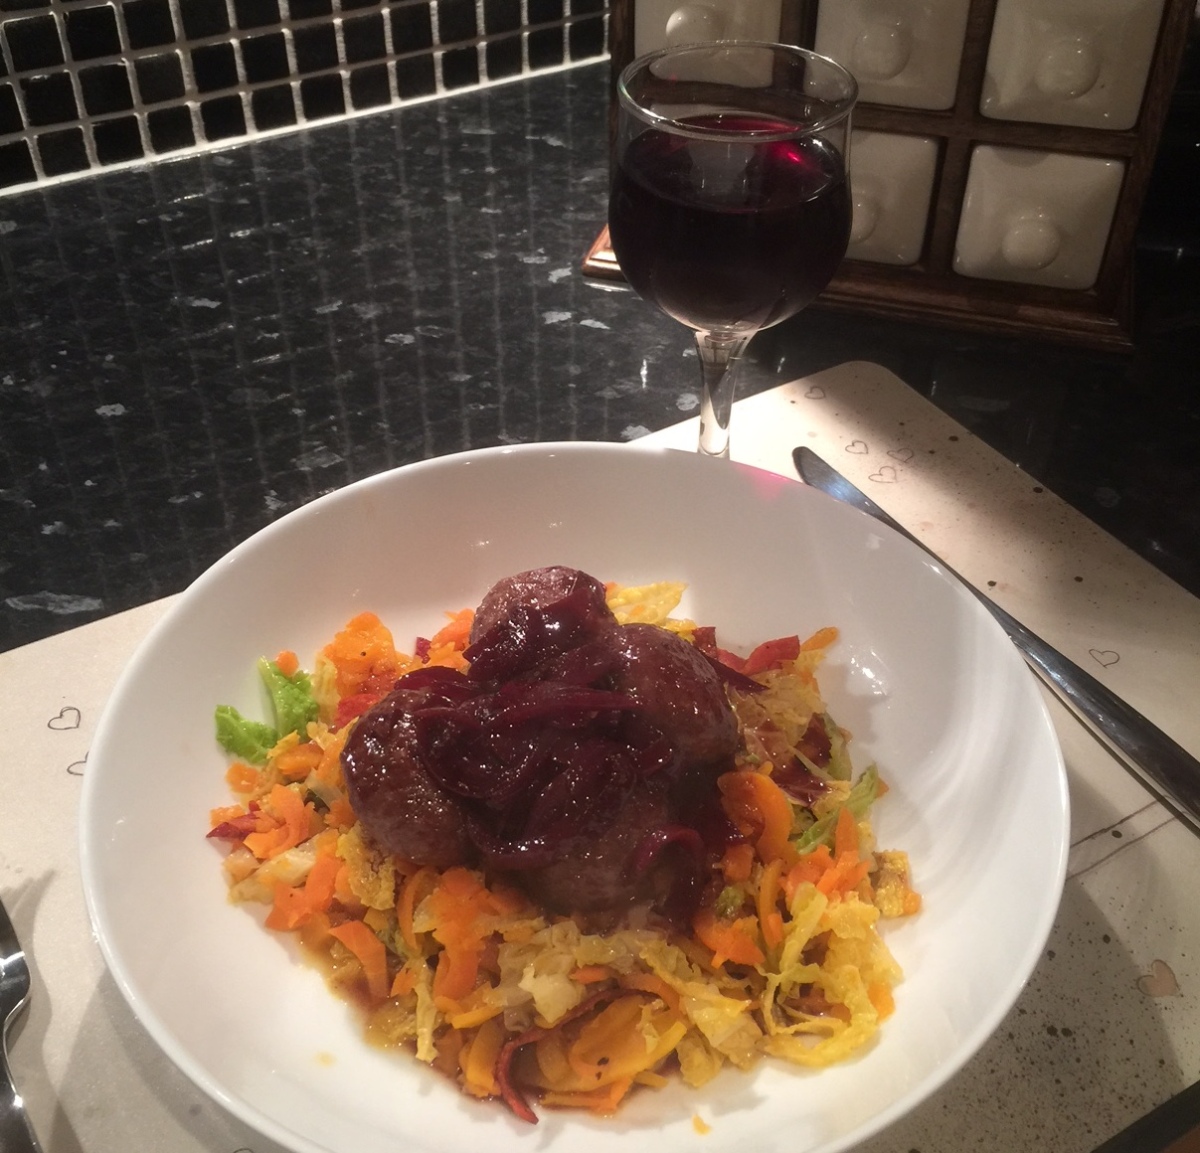 Rich Red Wine Meatballs with Vegetable Pasta